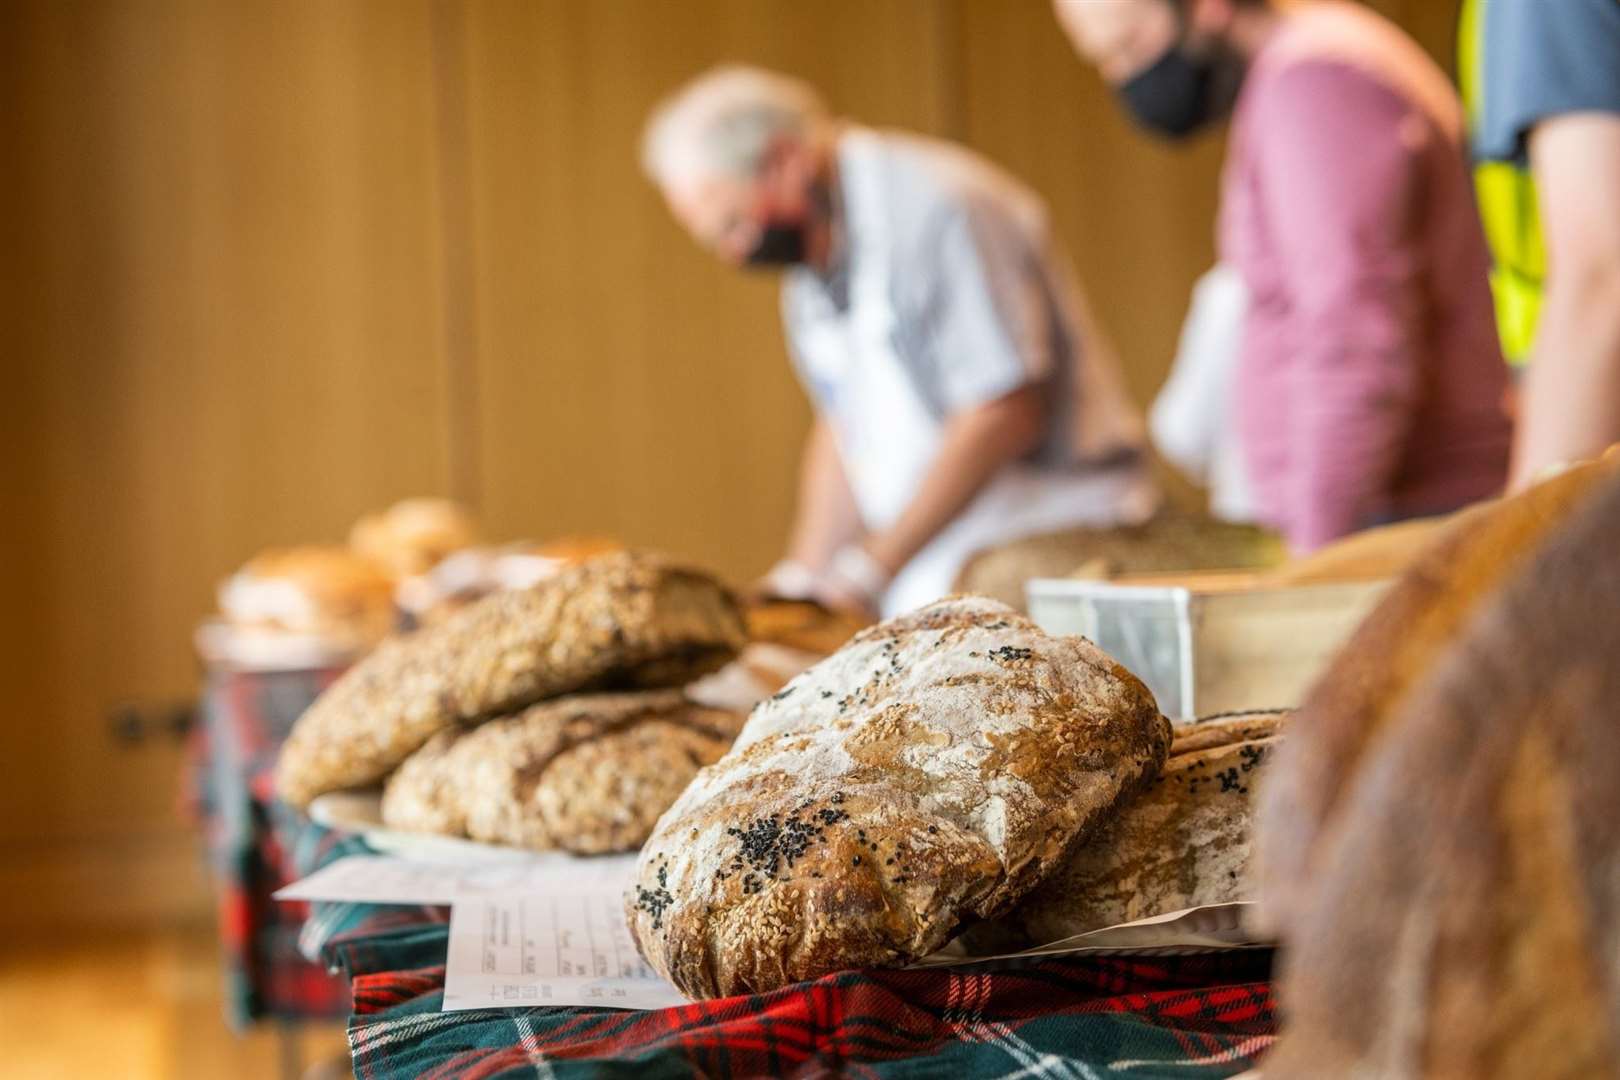 Judging takes place for the Bread Championship